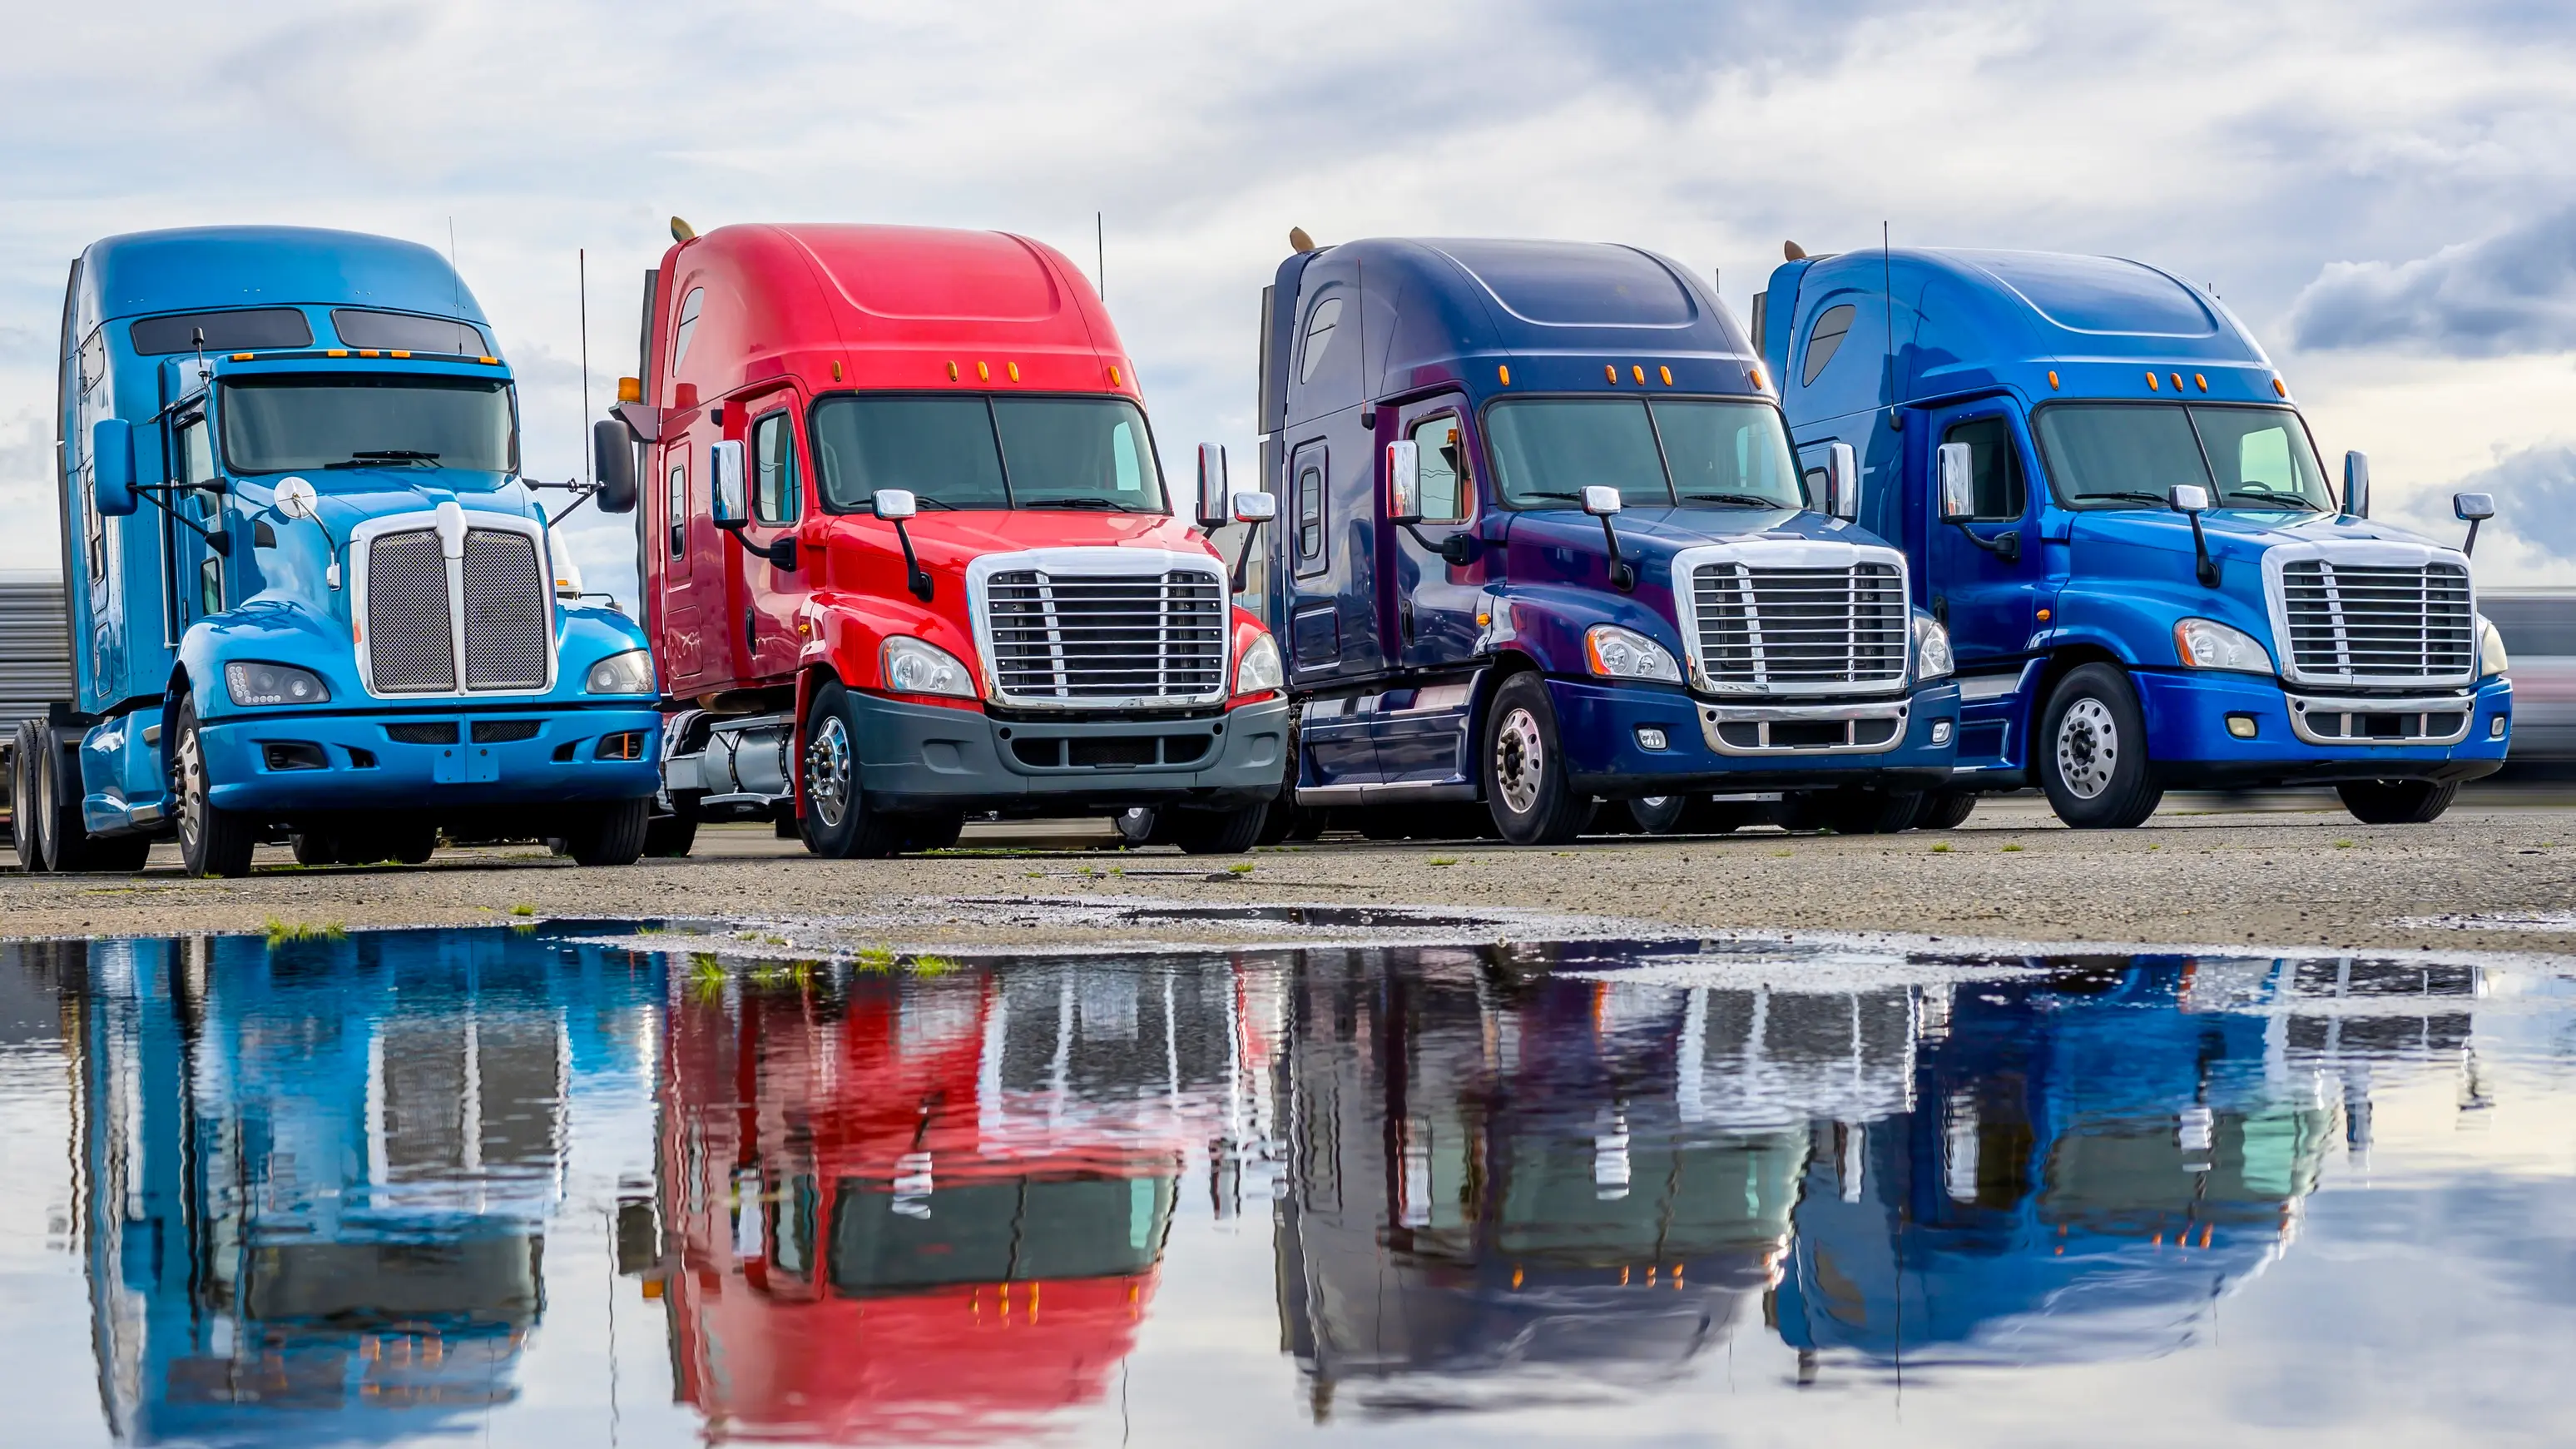 Finding the Sweet Spot: What's the Ideal Fleet Size for Your Business?